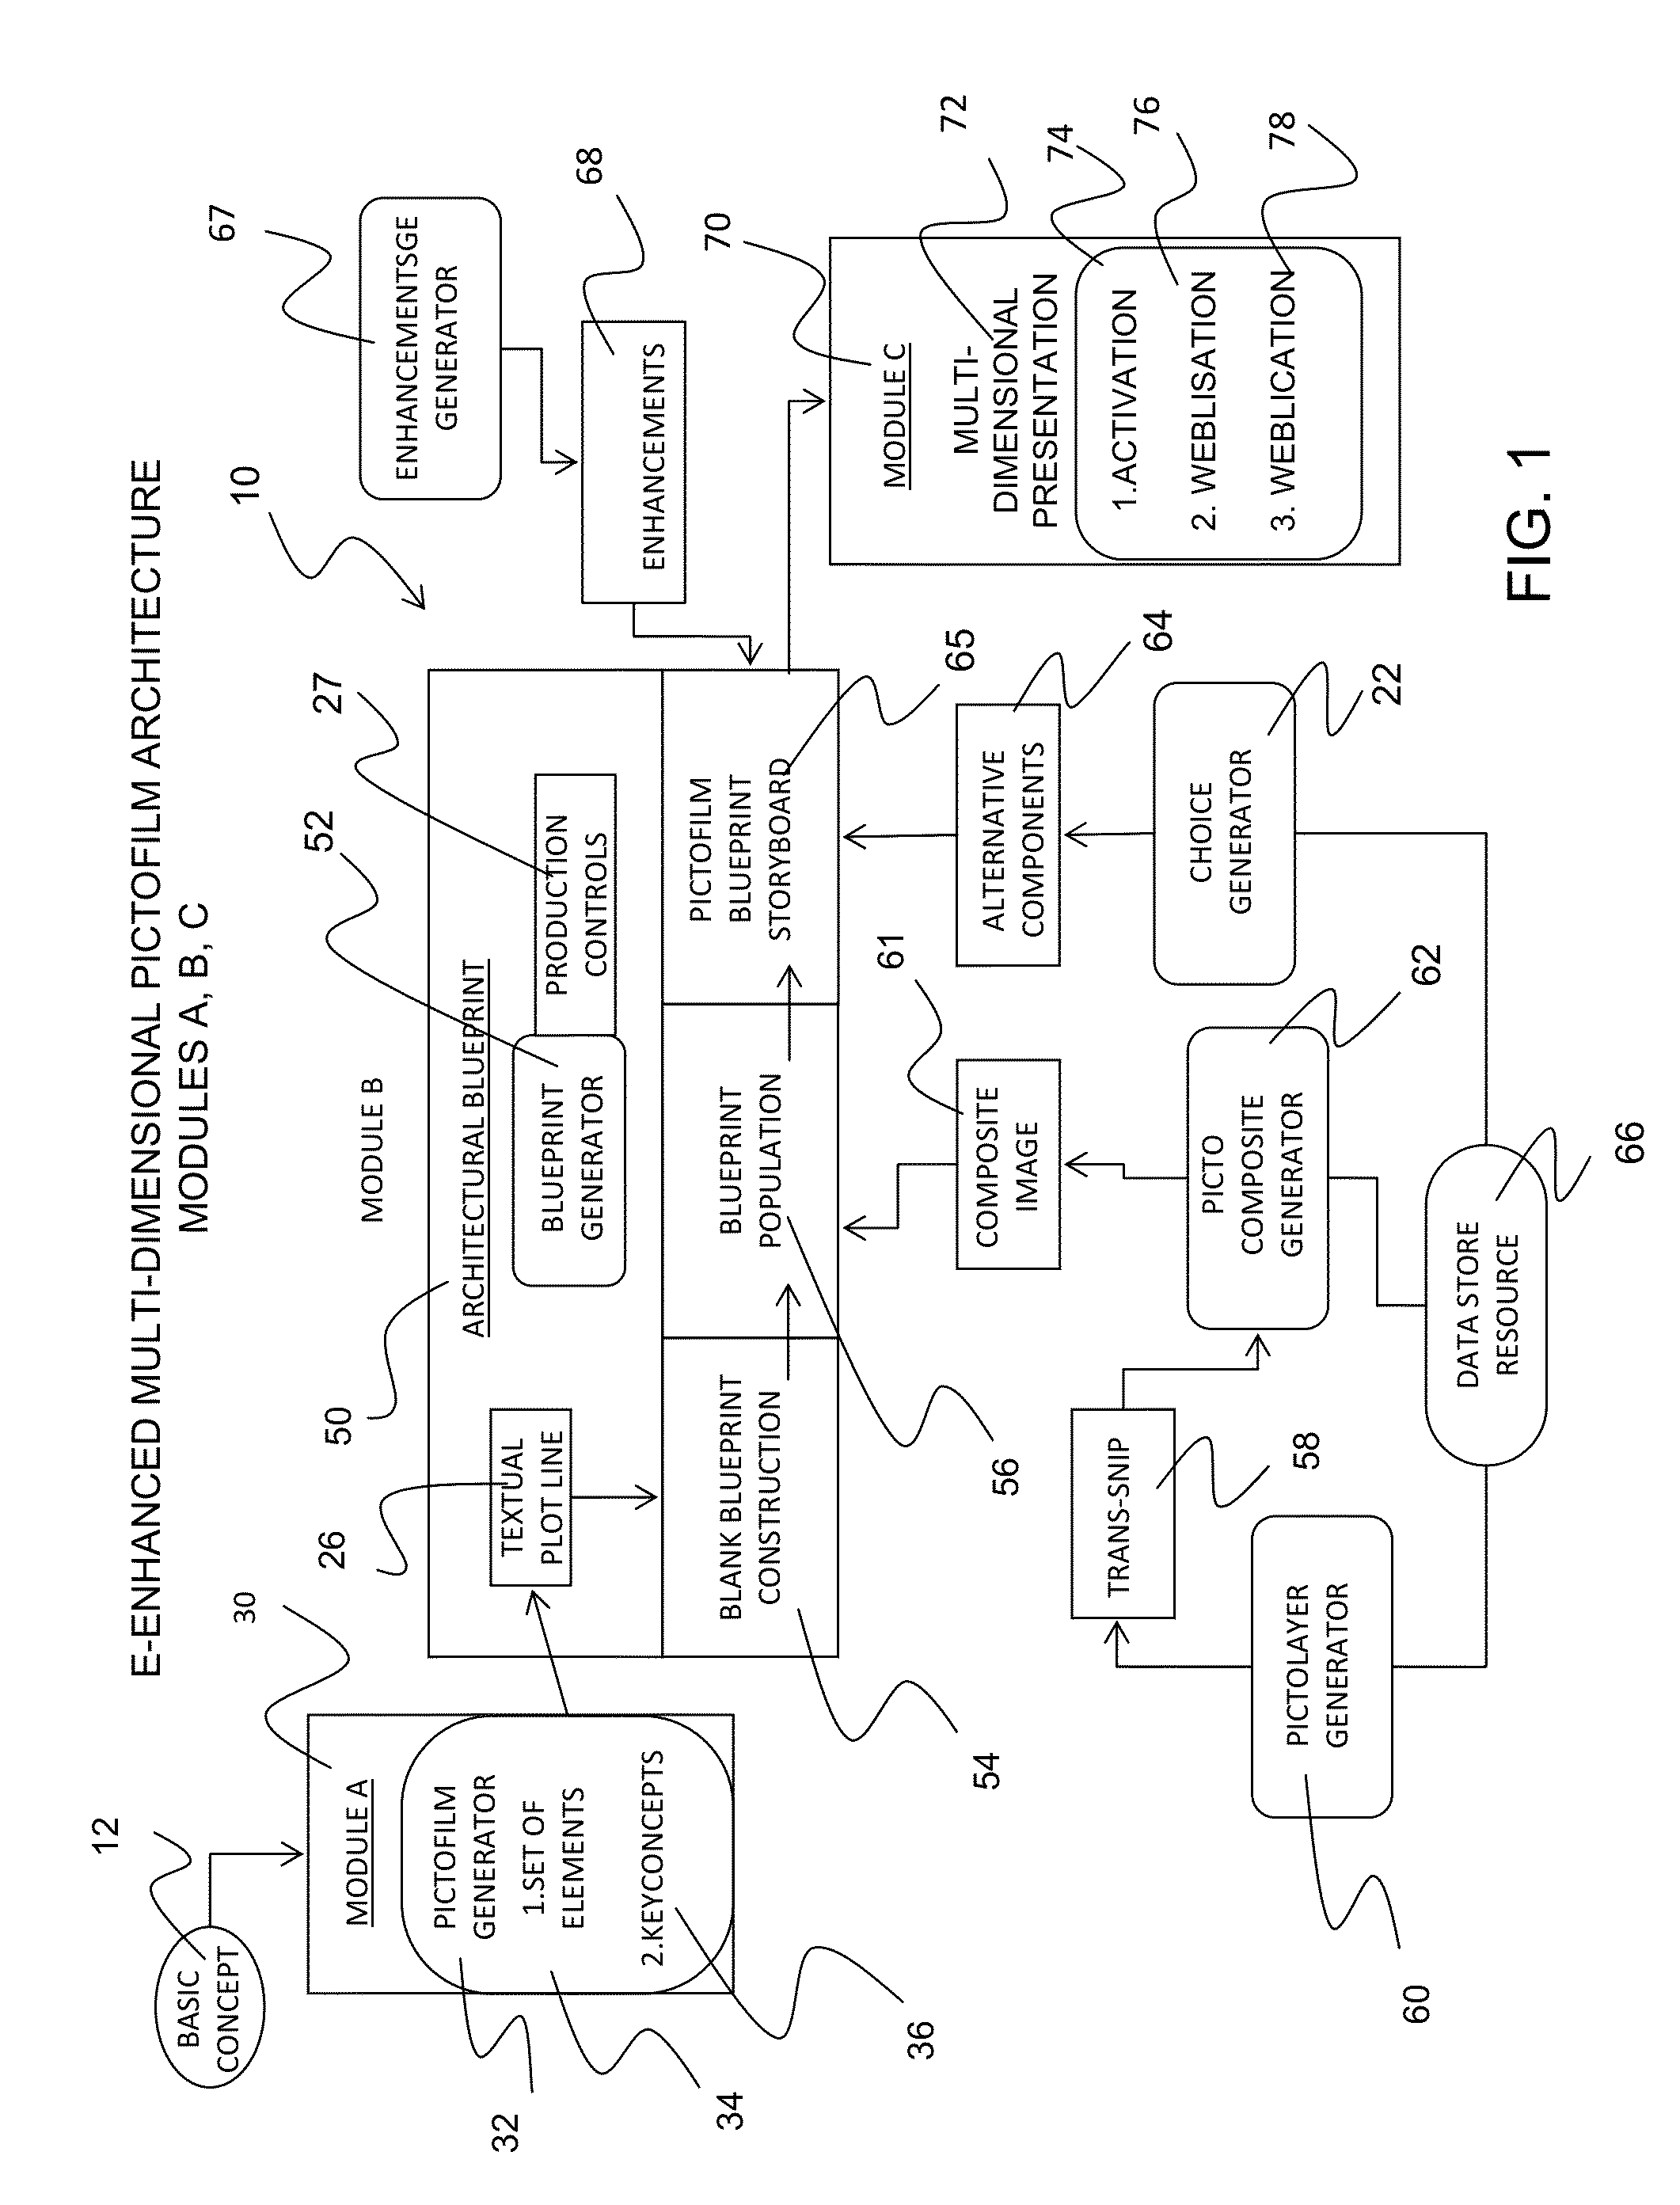 System and method for the creation of an e-enhanced multi-dimensional pictofilm presentation using pictooverlay interface enhanced trans-snip technology